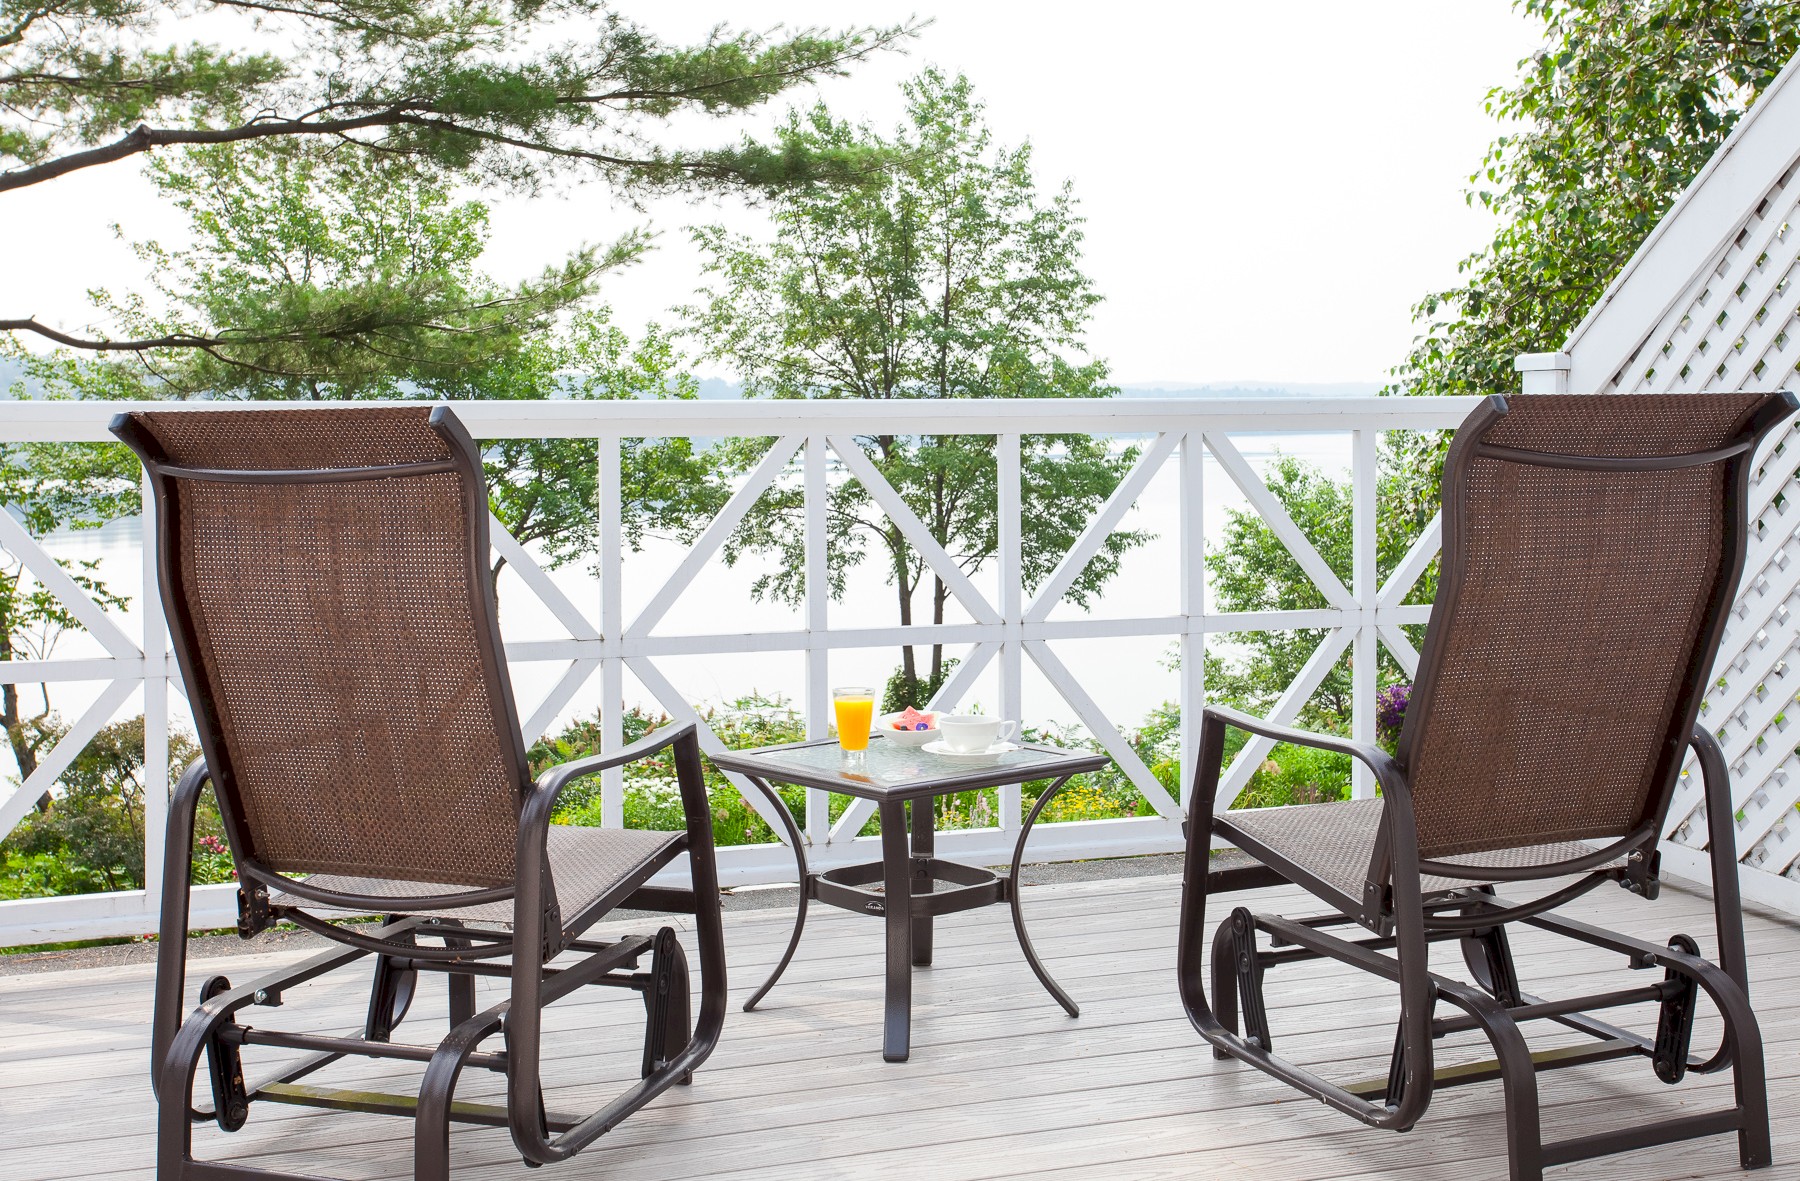 Two chairs on the balcony overlooking the lake